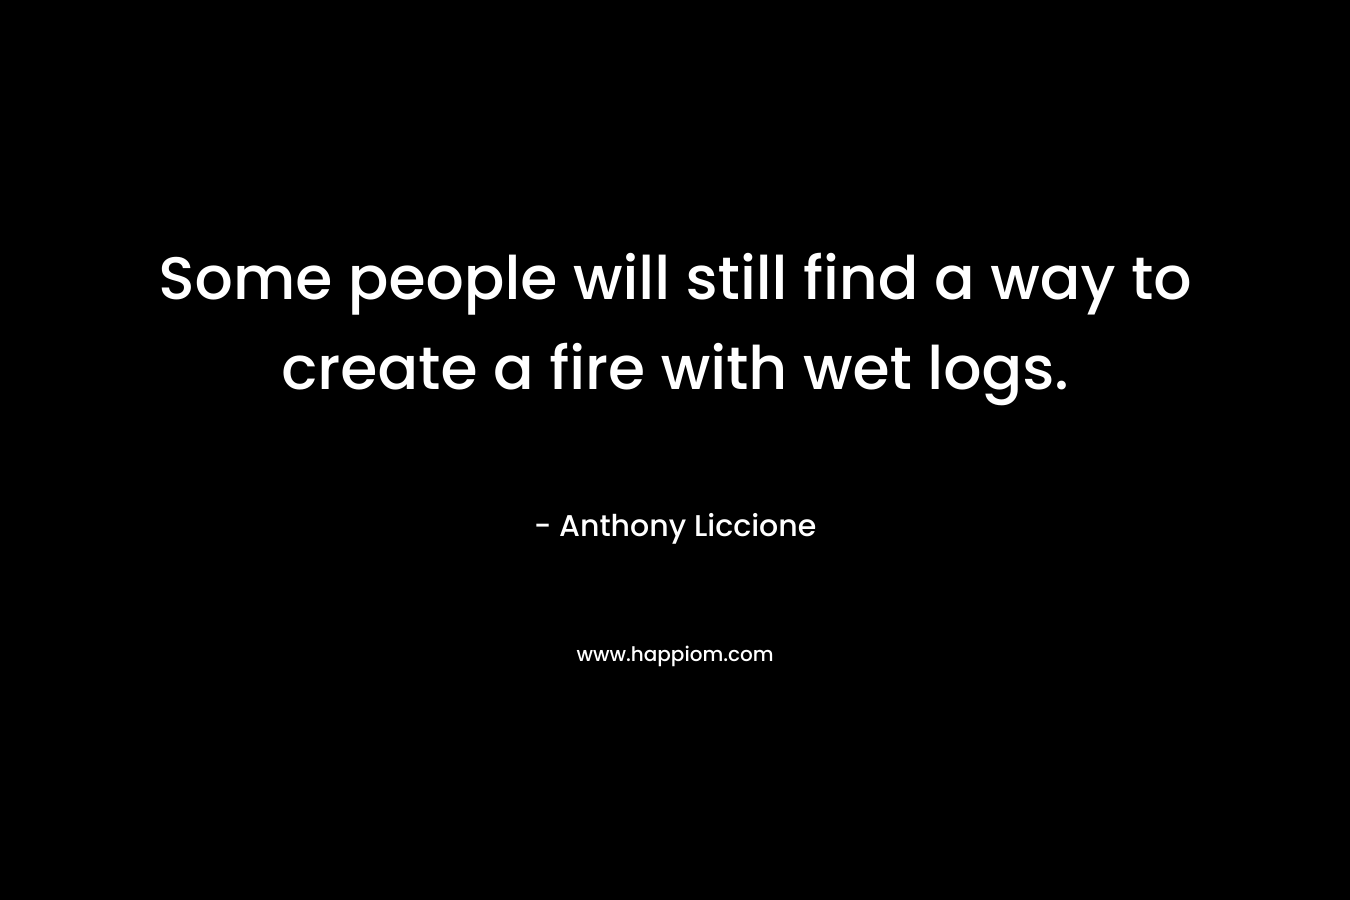 Some people will still find a way to create a fire with wet logs. – Anthony Liccione